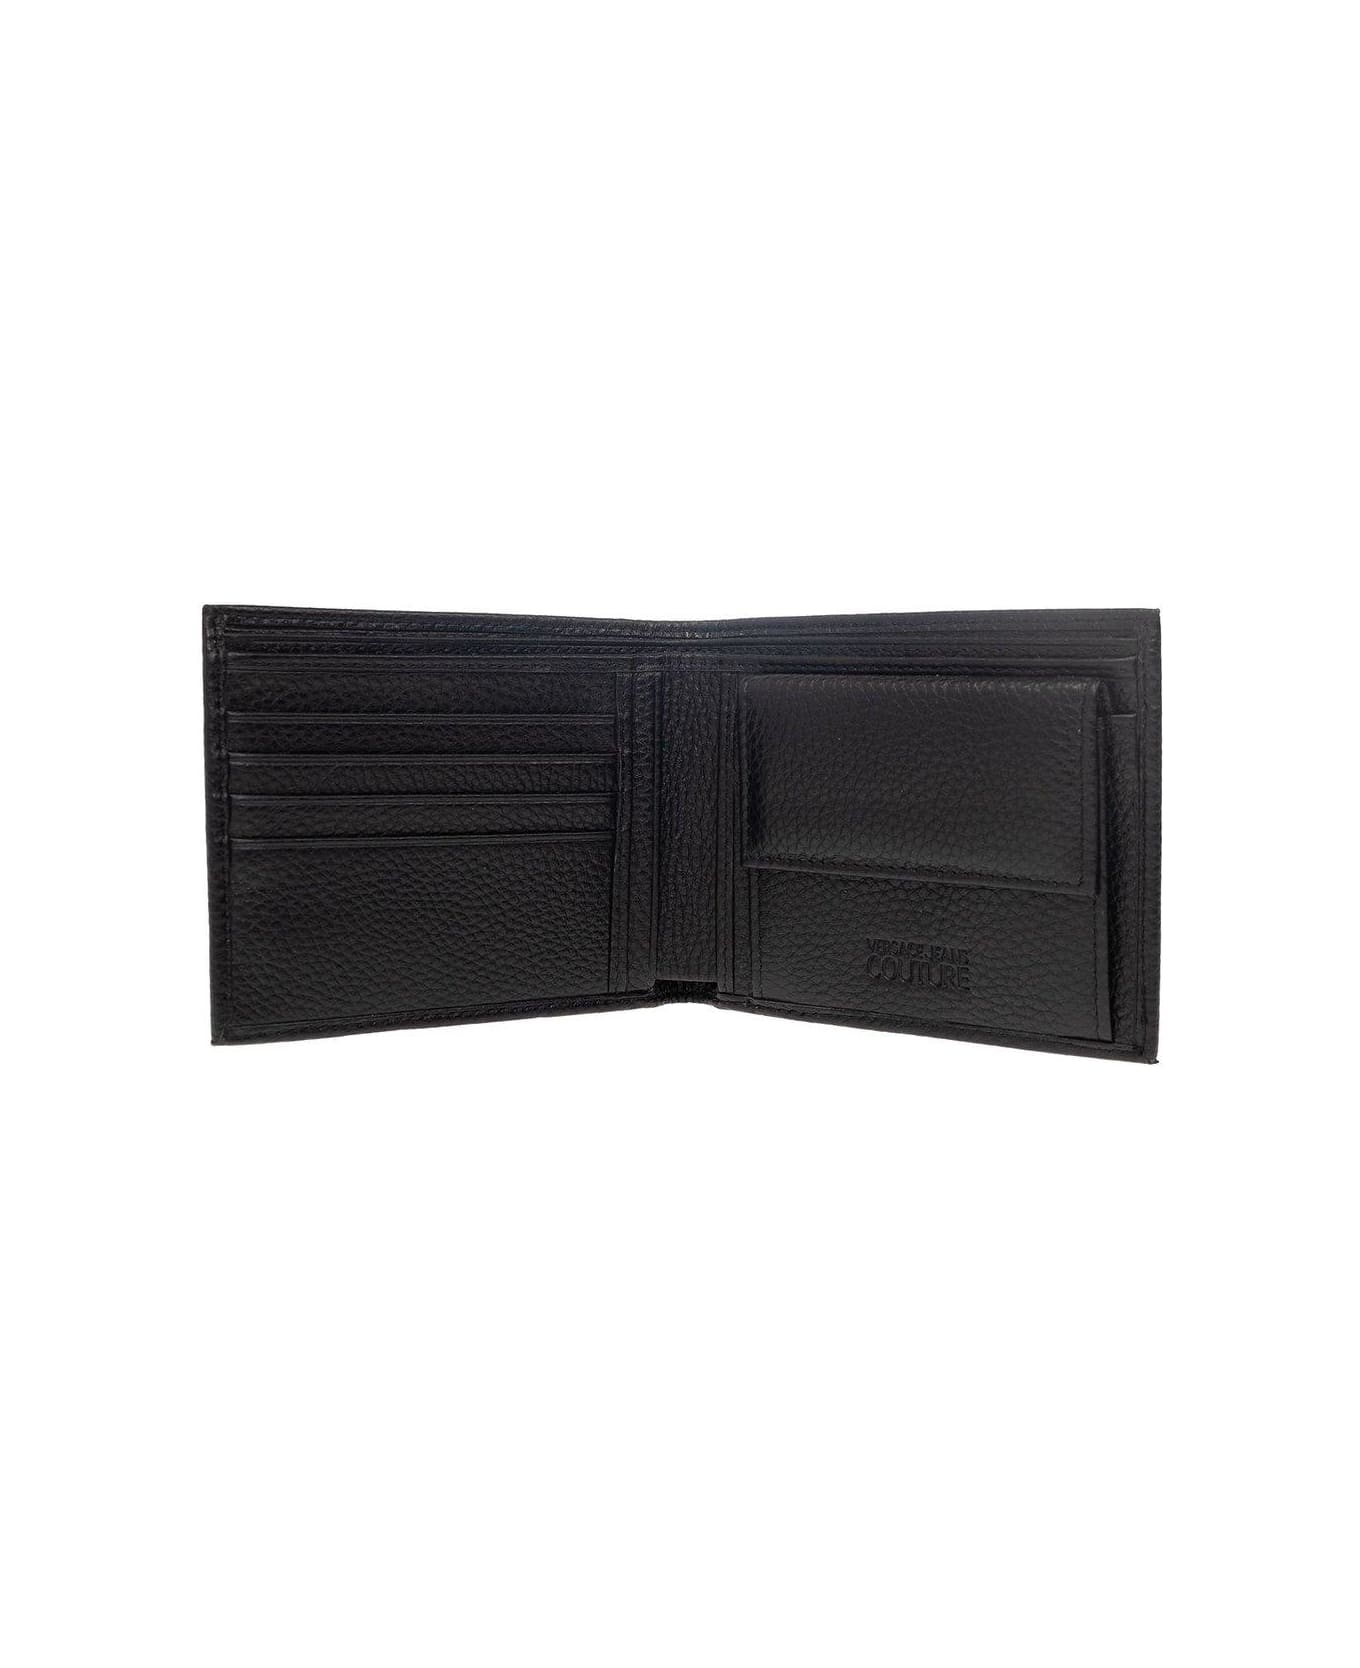 Versace Jeans Couture Wallet - BLACK/GOLD